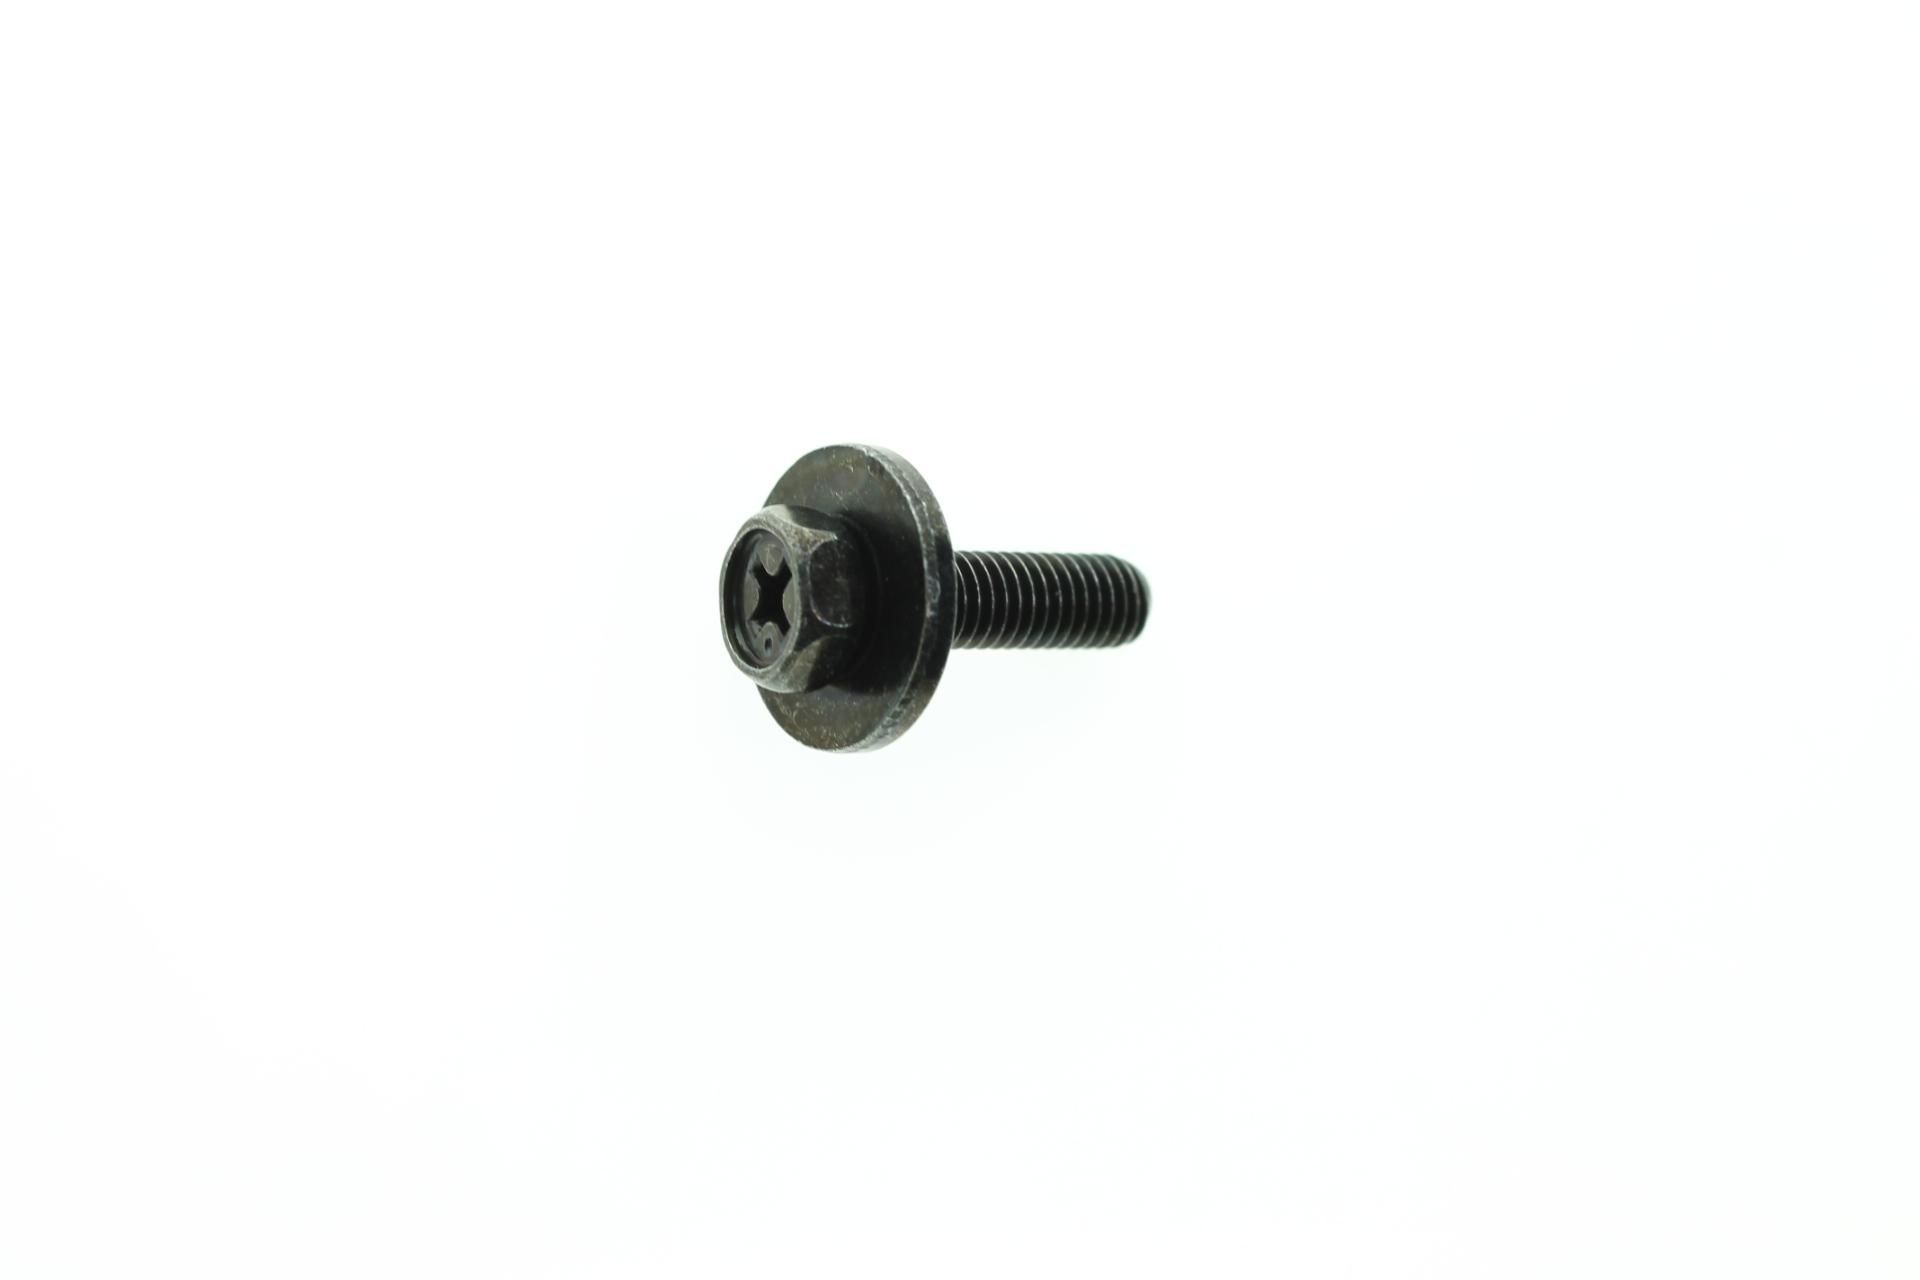 90119-05001-00 BOLT, WITH WASHER